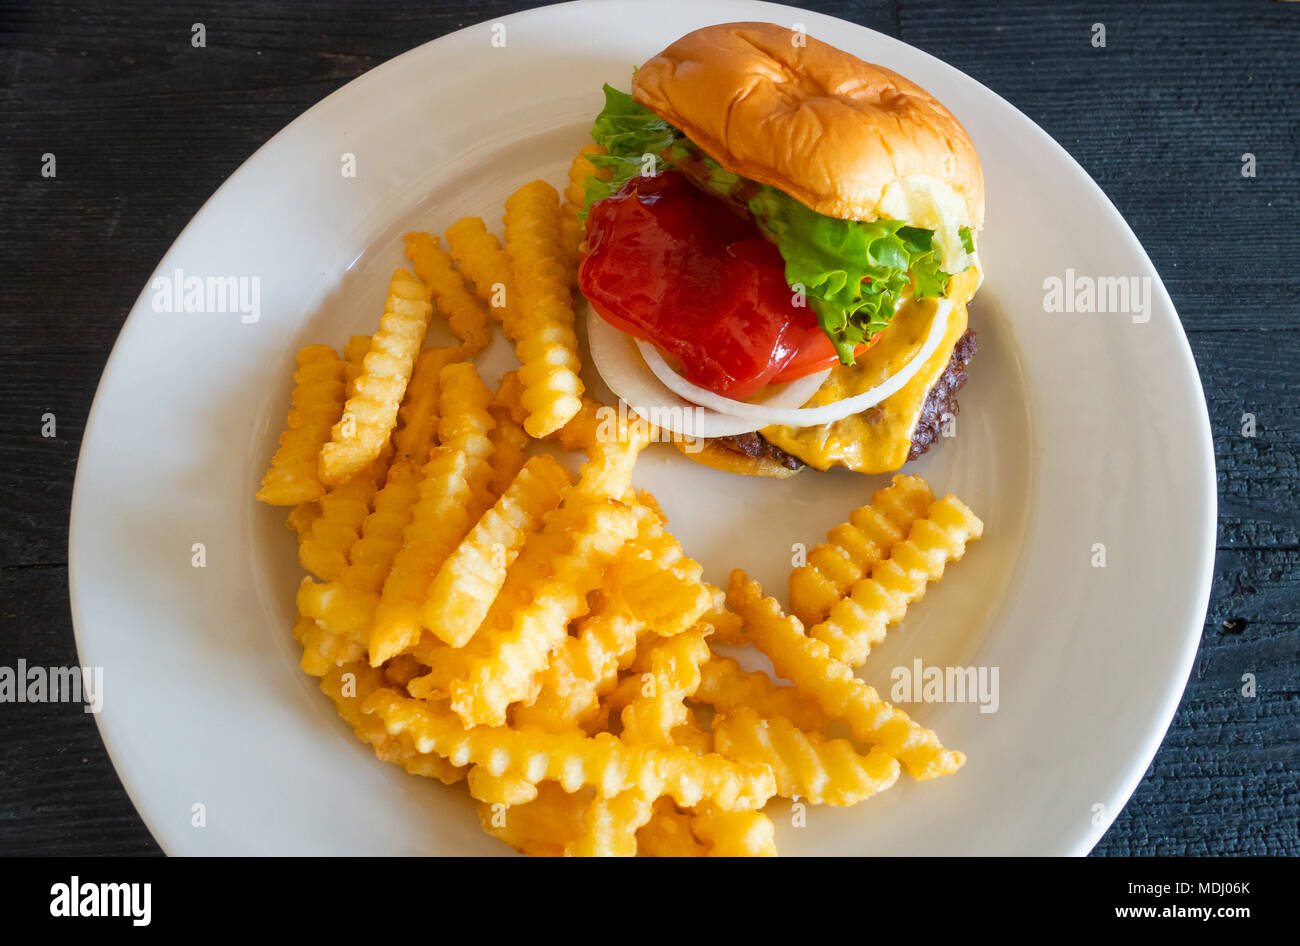 Cheeseburger and crinkle cut fries Stock Photo